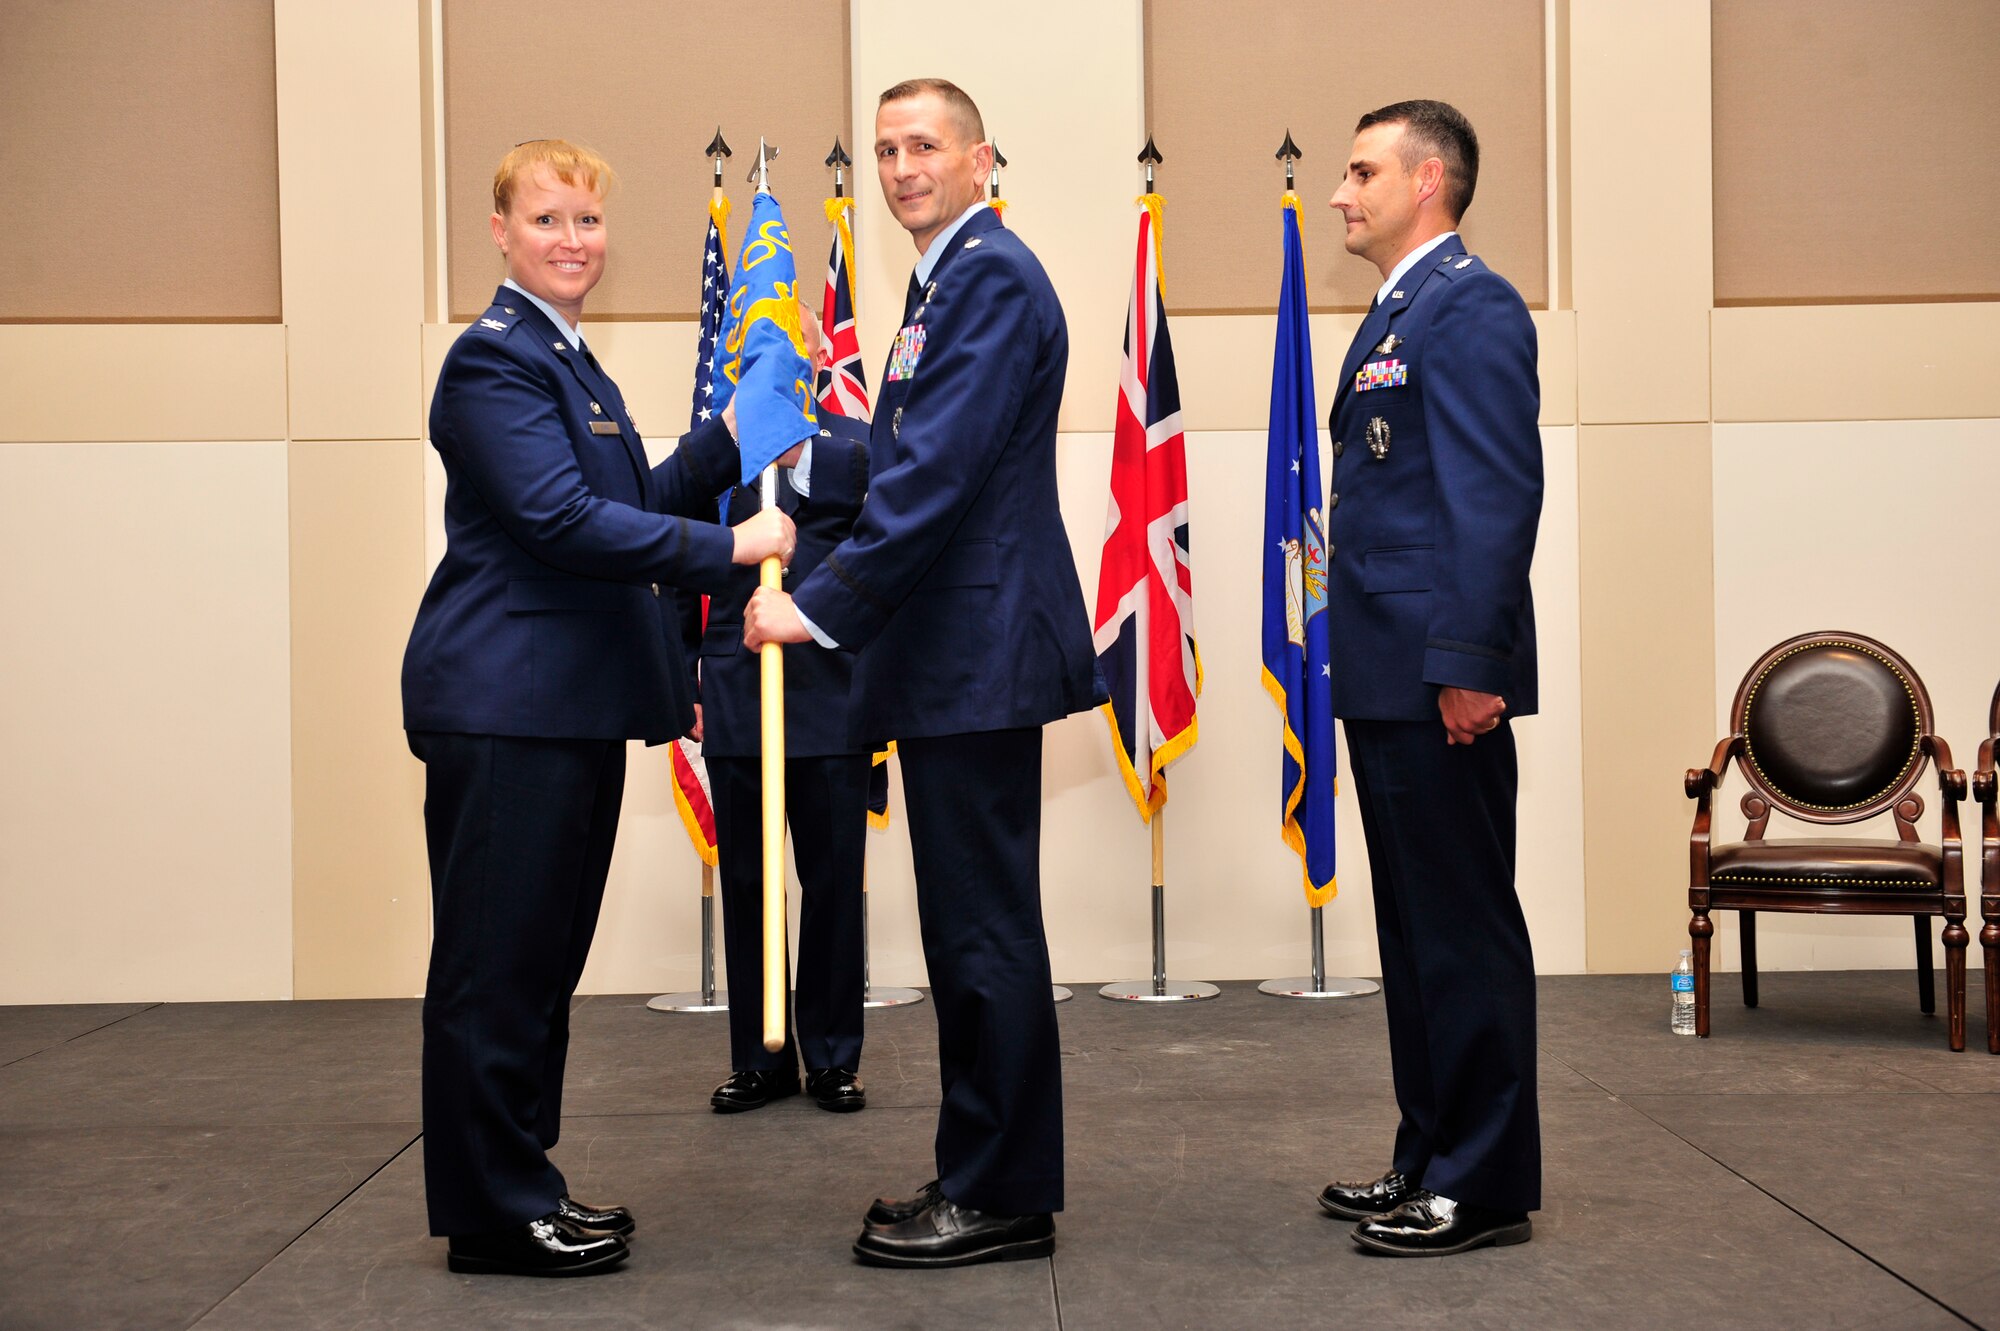 Col. DeAnna Burt, left, 460th Operations Group commander, presents the 2nd Space Warning Squadron guidon to Lt. Col. Francois Roy, middle, 2nd SWS commander, as Lt. Col. John Henley, former 2nd SWS commander stands by June 19, 2013, at the Leadership Development Center on Buckley Air Force Base, Colo. For Roy, this will be his first command of a squadron. (U.S. Air Force photo by Airman 1st Class Darryl Bolden Jr./Released)